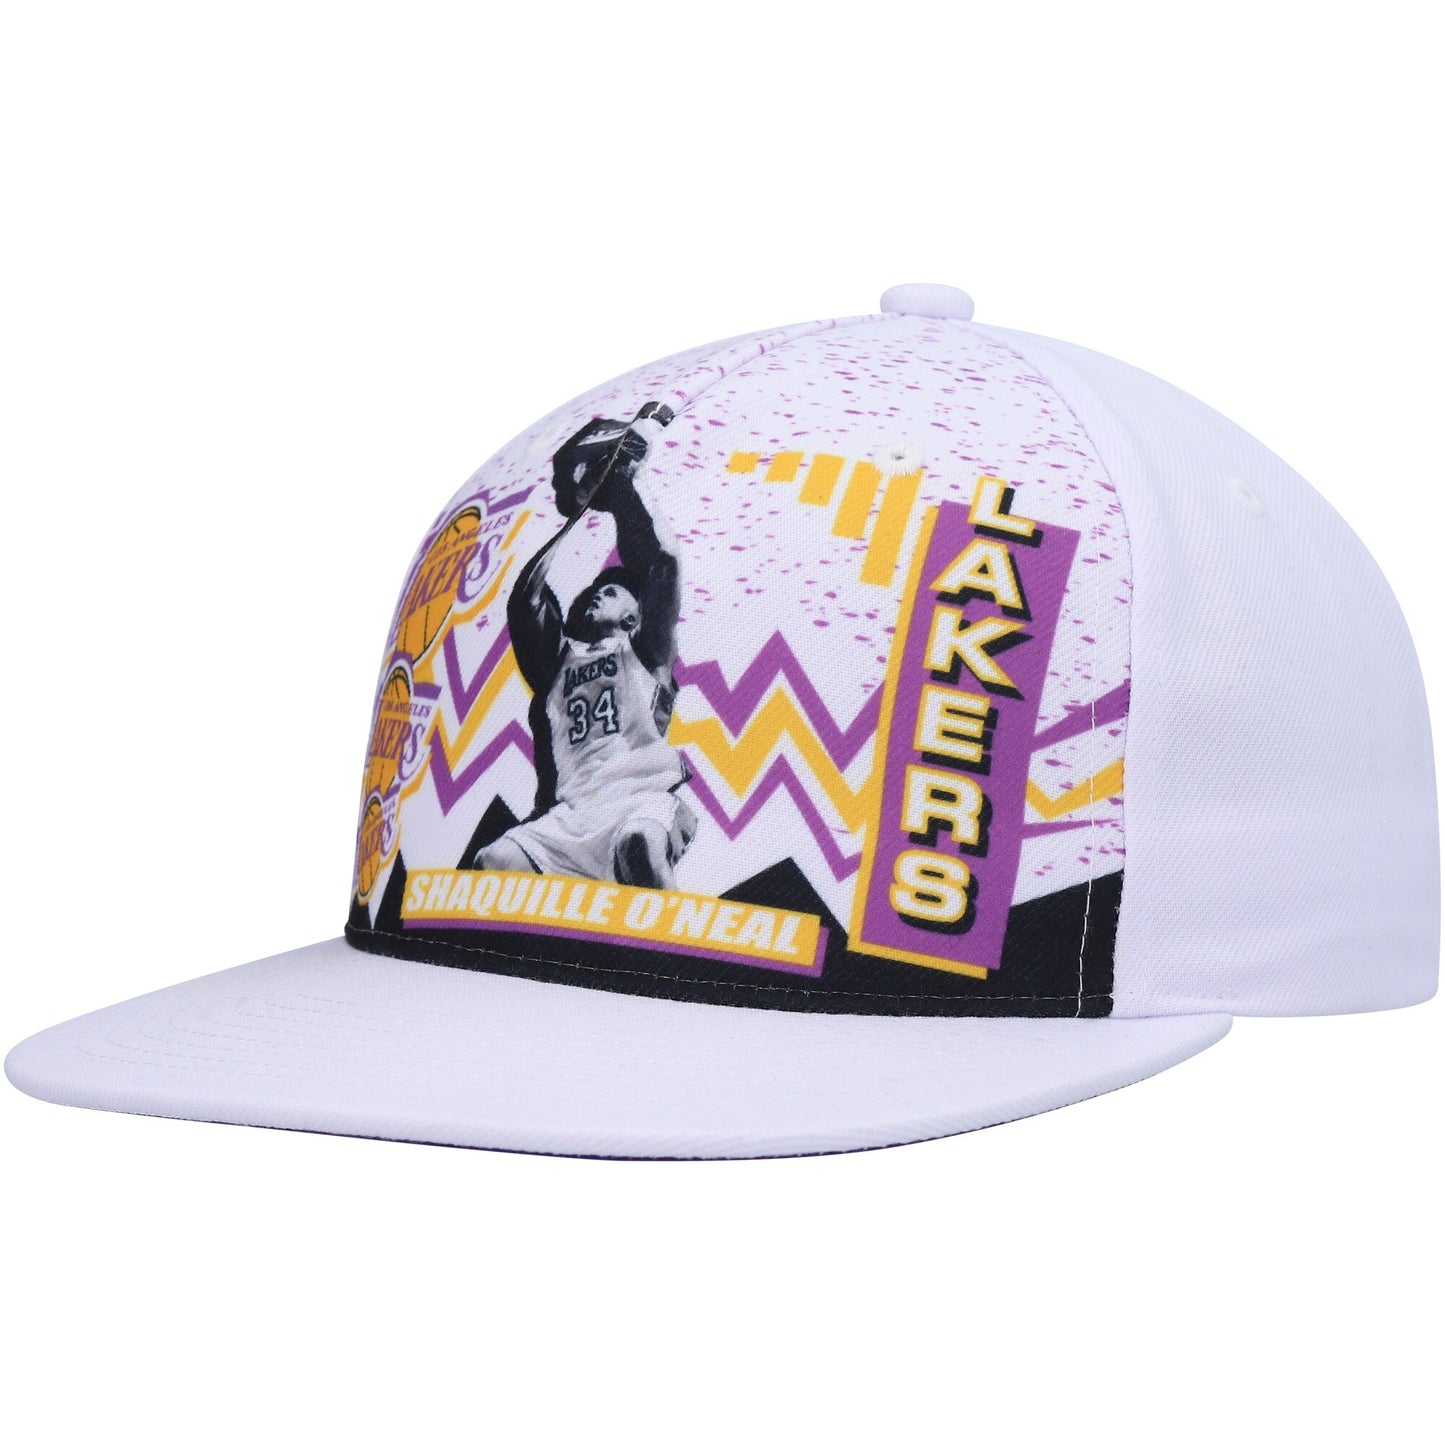 Shaquille O'Neal Los Angeles Lakers Mitchell & Ness Hardwood Classics 90's Playa Deadstock Snapback Hat - White